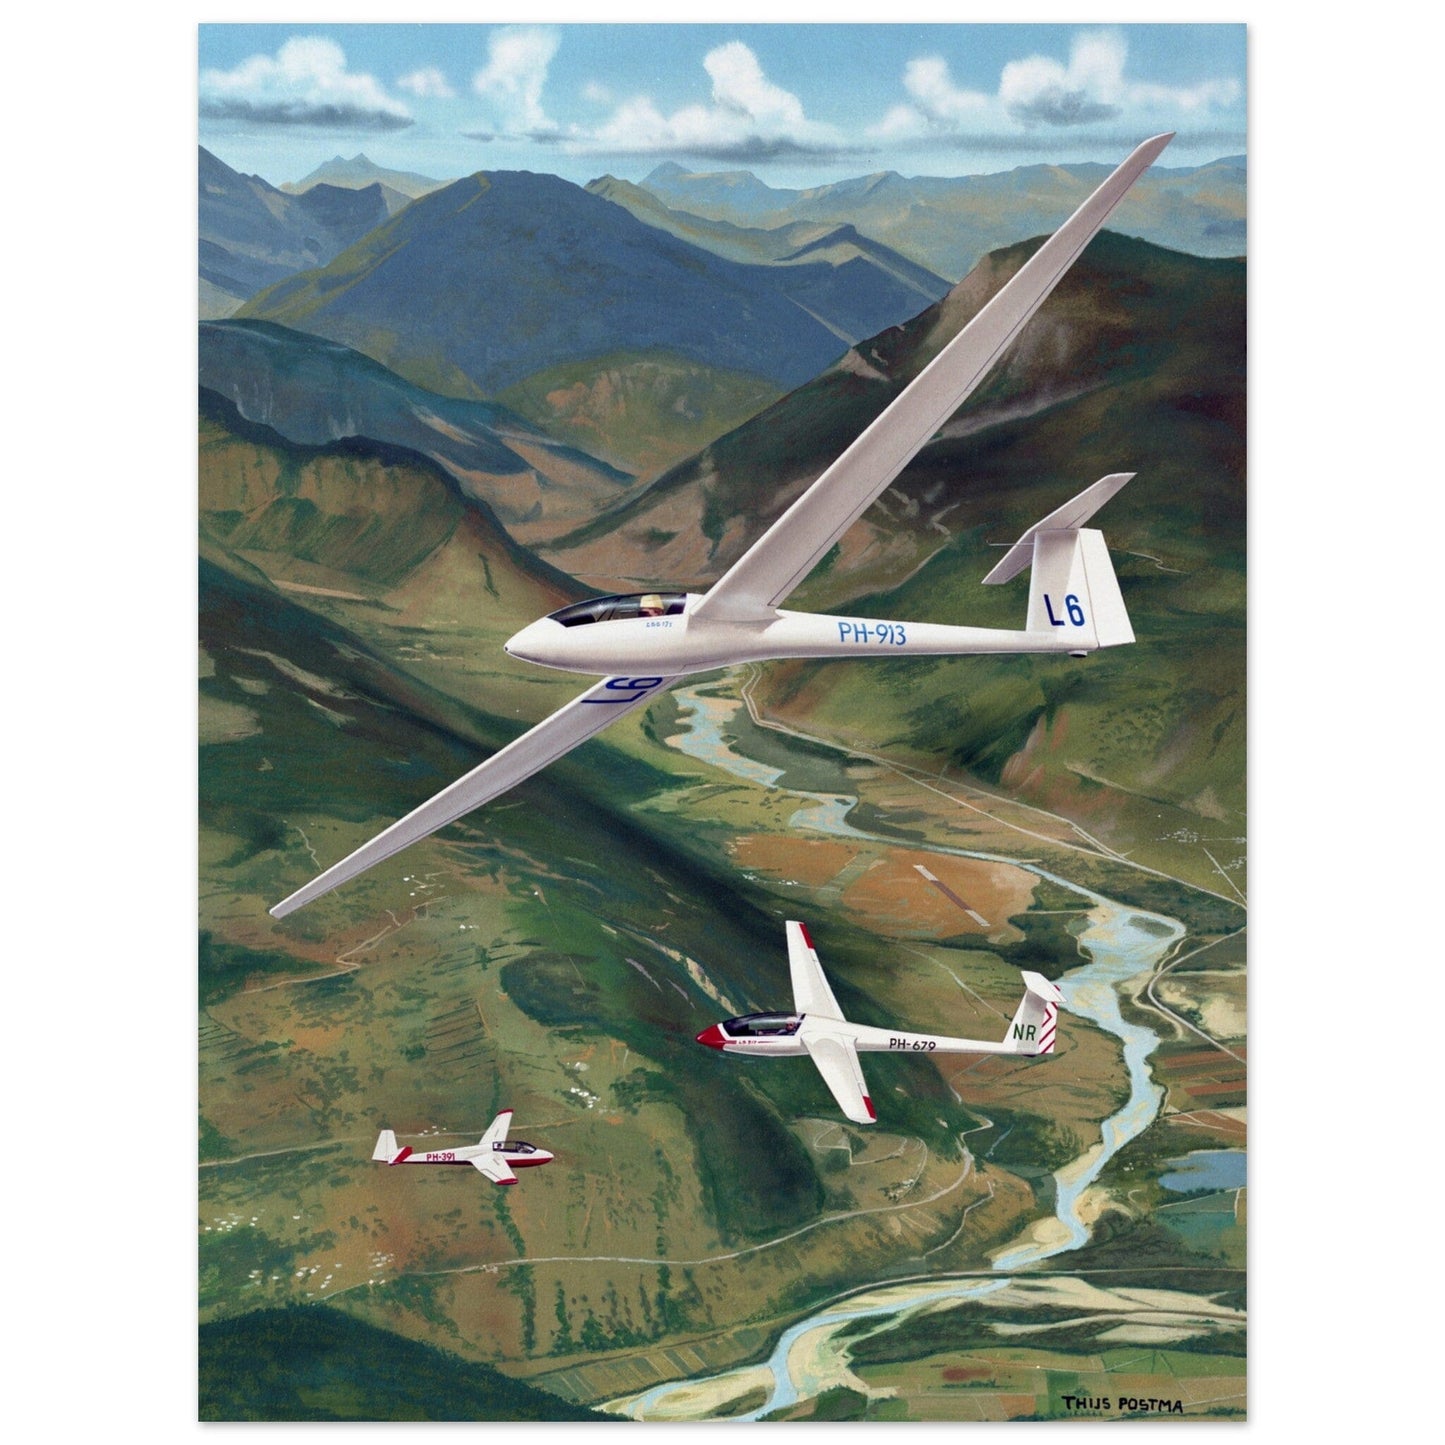 Thijs Postma - Poster - Gliders Over France Poster Only TP Aviation Art 60x80 cm / 24x32″ 